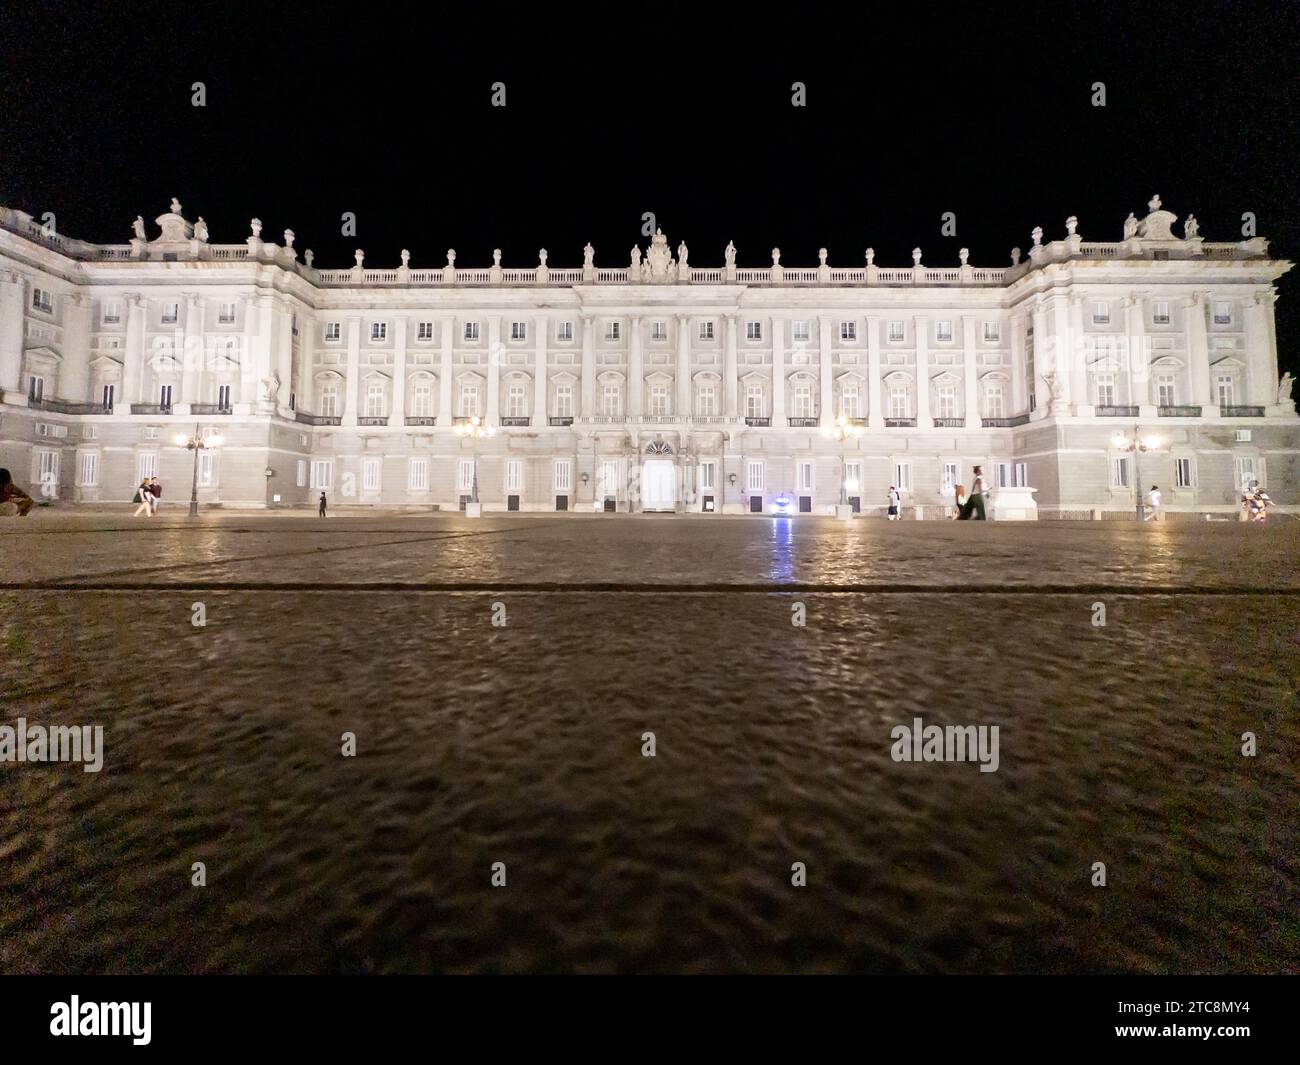 Exterior and courtyard of the historic Royal Palace in Madrid, Spain at night Stock Photo